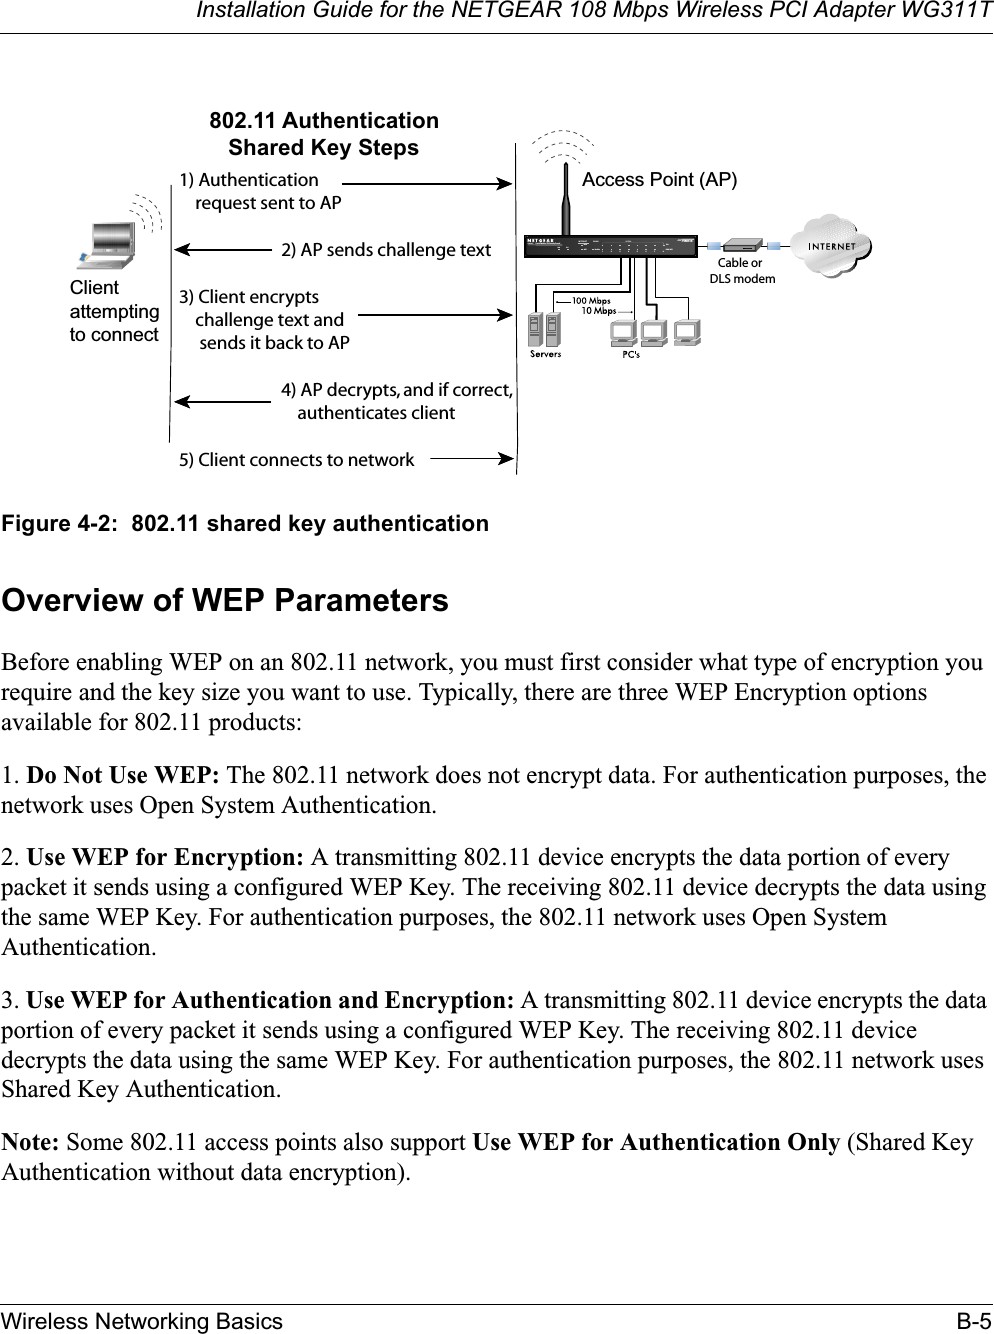 Installation Guide for the NETGEAR 108 Mbps Wireless PCI Adapter WG311TWireless Networking Basics B-5Figure 4-2:  802.11 shared key authenticationOverview of WEP ParametersBefore enabling WEP on an 802.11 network, you must first consider what type of encryption you require and the key size you want to use. Typically, there are three WEP Encryption options available for 802.11 products:1. Do Not Use WEP: The 802.11 network does not encrypt data. For authentication purposes, the network uses Open System Authentication.2. Use WEP for Encryption: A transmitting 802.11 device encrypts the data portion of every packet it sends using a configured WEP Key. The receiving 802.11 device decrypts the data using the same WEP Key. For authentication purposes, the 802.11 network uses Open System Authentication.3. Use WEP for Authentication and Encryption: A transmitting 802.11 device encrypts the data portion of every packet it sends using a configured WEP Key. The receiving 802.11 device decrypts the data using the same WEP Key. For authentication purposes, the 802.11 network uses Shared Key Authentication.Note: Some 802.11 access points also support Use WEP for Authentication Only (Shared Key Authentication without data encryption). INTERNET LOCALACT12345678LNKLNK/ACT100Cable/DSL ProSafeWirelessVPN Security FirewallMODEL FVM318PWR TESTWLANEnableAccess Point (AP)1) Authenticationrequest sent to AP2) AP sends challenge text3) Client encryptschallenge text andsends it back to AP4) AP decrypts, and if correct,authenticates client5) Client connects to network802.11 AuthenticationShared Key StepsCable orDLS modemClientattemptingto connect